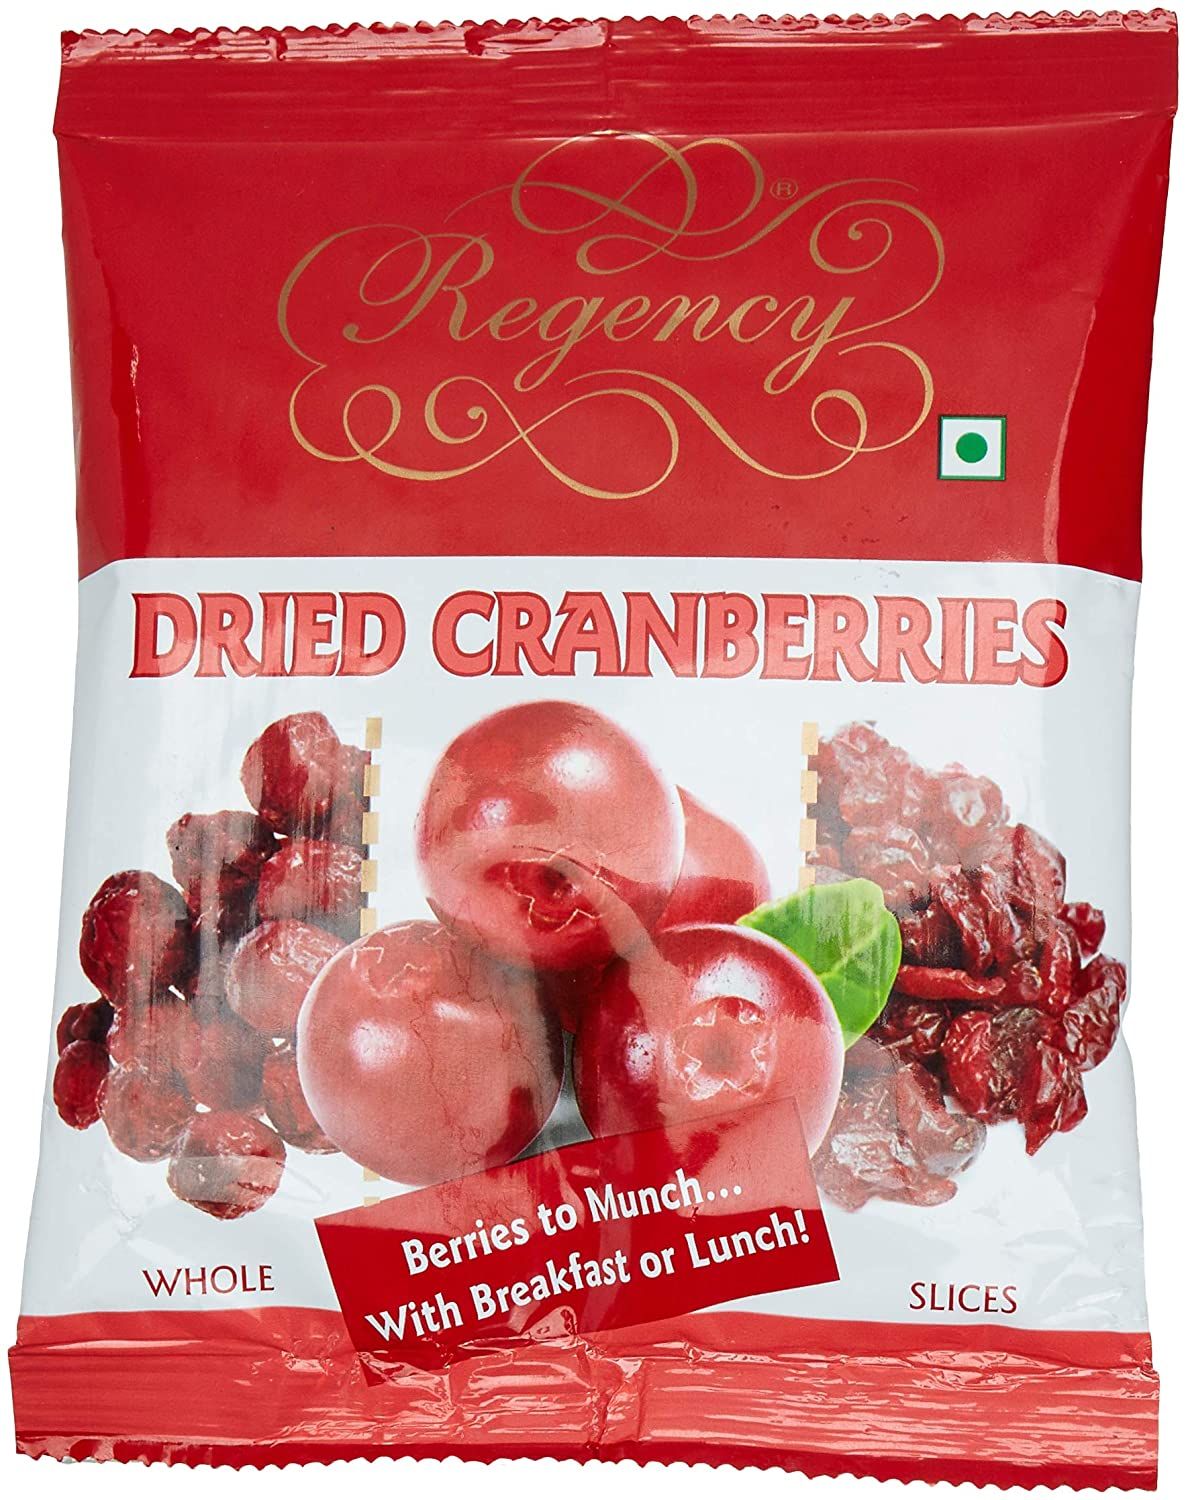 Regency Dried Cranberry Slices Image